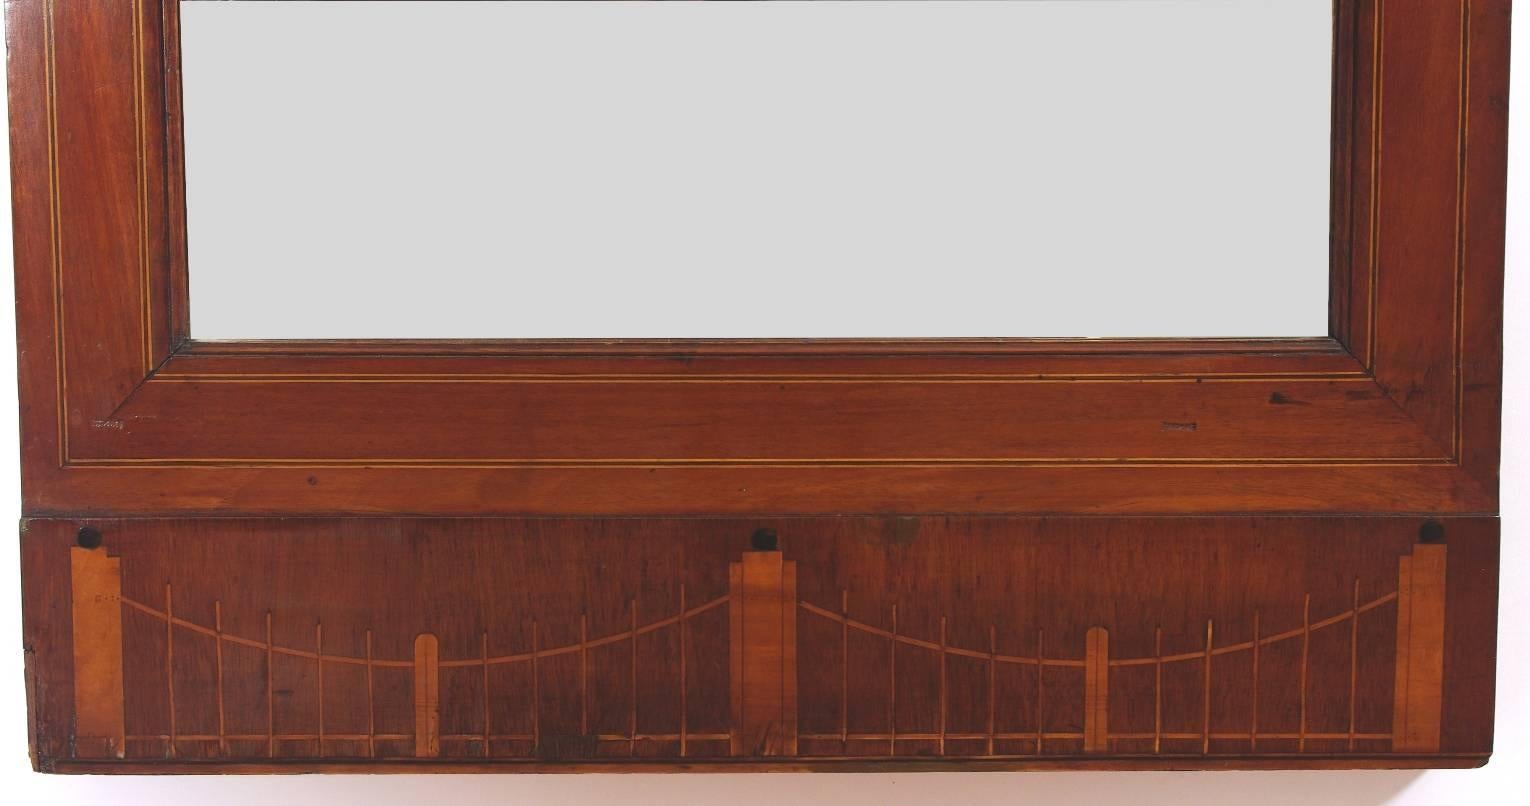 Biedermeier mahogany pier mirror, the crest with an inlaid fan on a molded cornice; the upper glass with a stylized caduceus motif over the lower frame with string inlay; the plinth with an elaborately inlaid fence and post design.

This